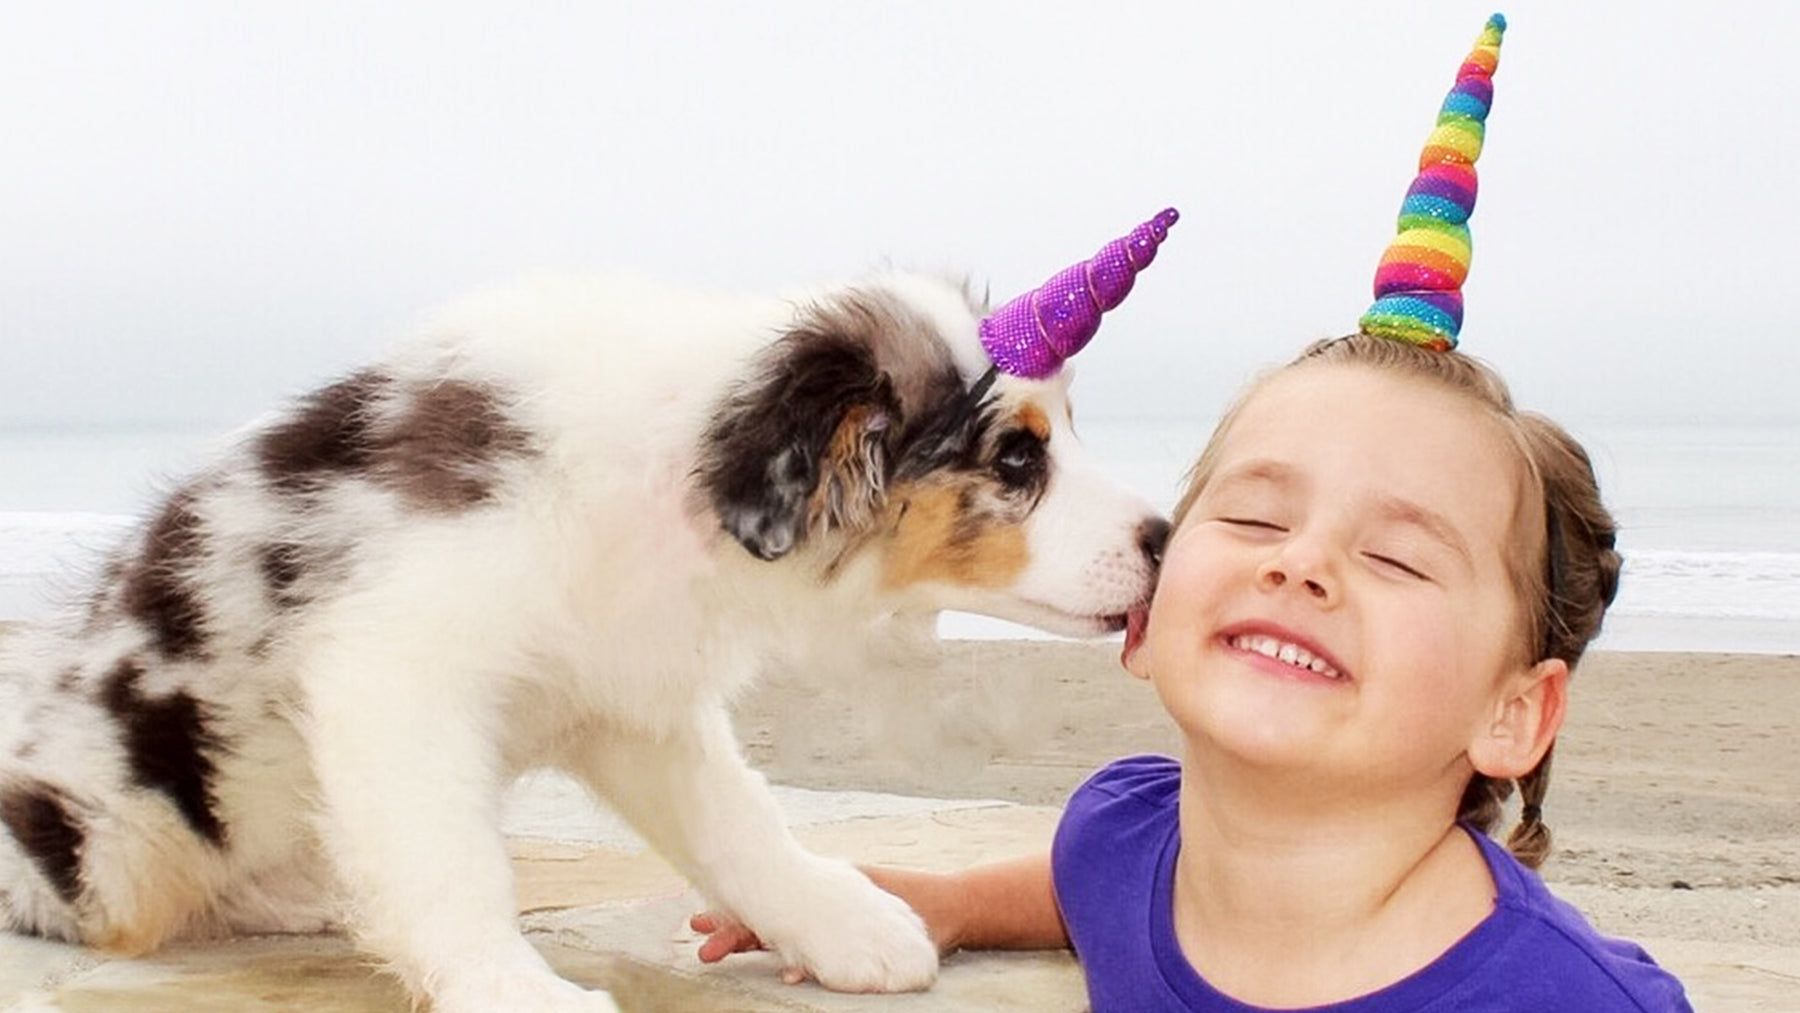 Unicorn horn on girl and puppy